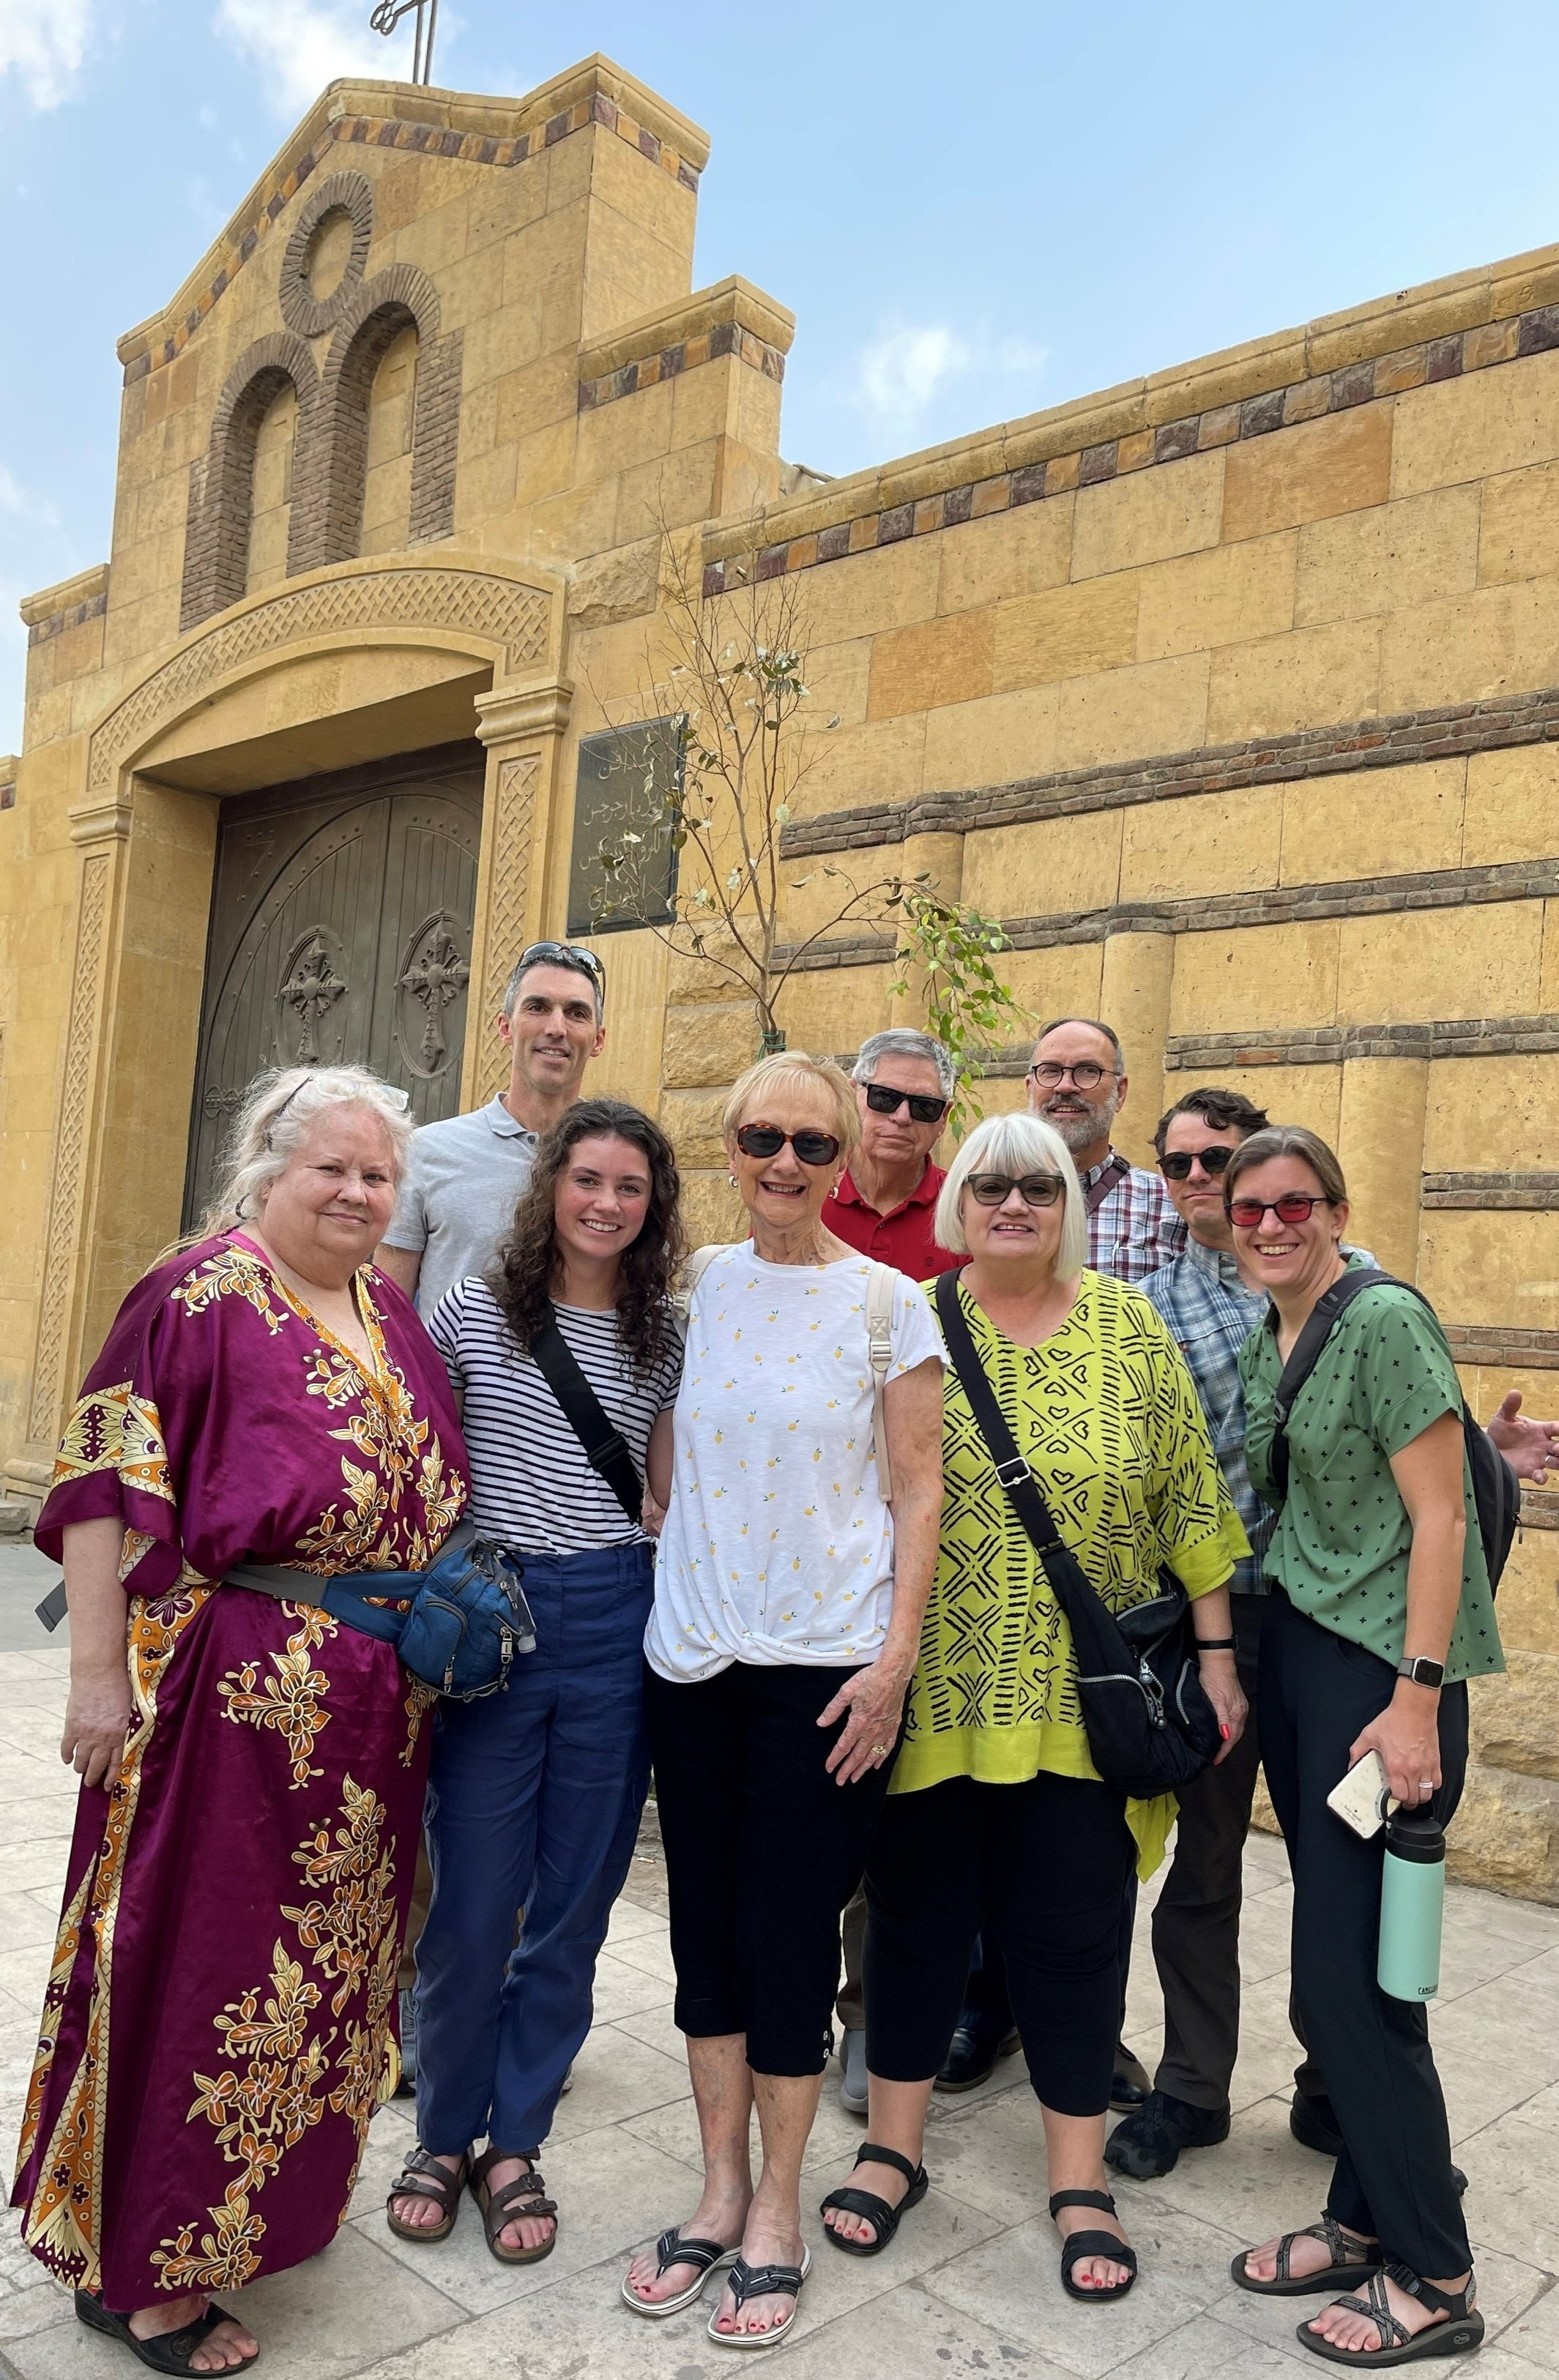   Ready for our exploration of Old Coptic Cairo (for 6 of us, our first visit to Egypt!)  